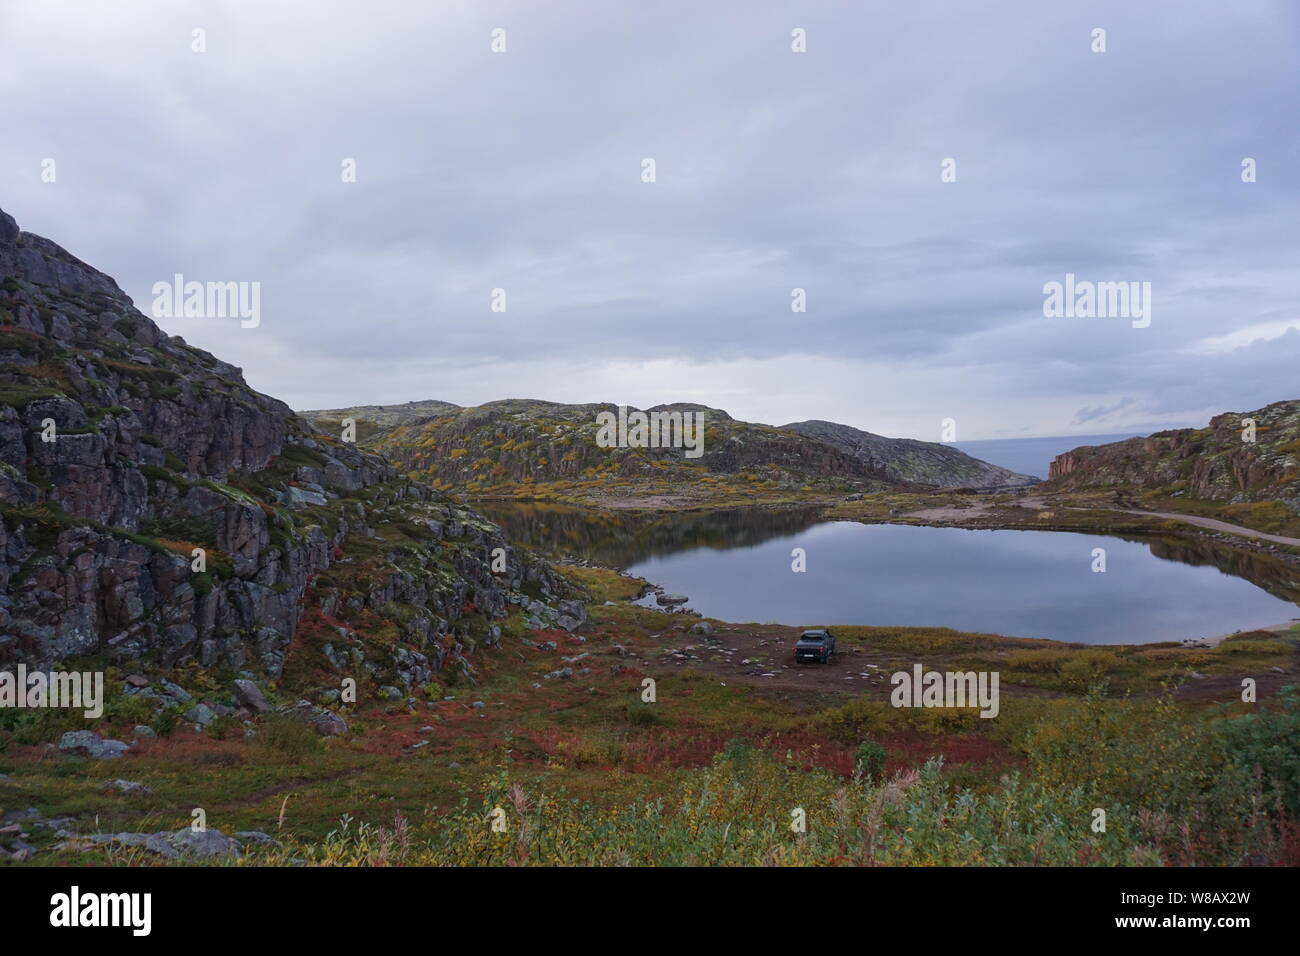 The view of tundra and a water body in Teriberka, Russia Stock Photo